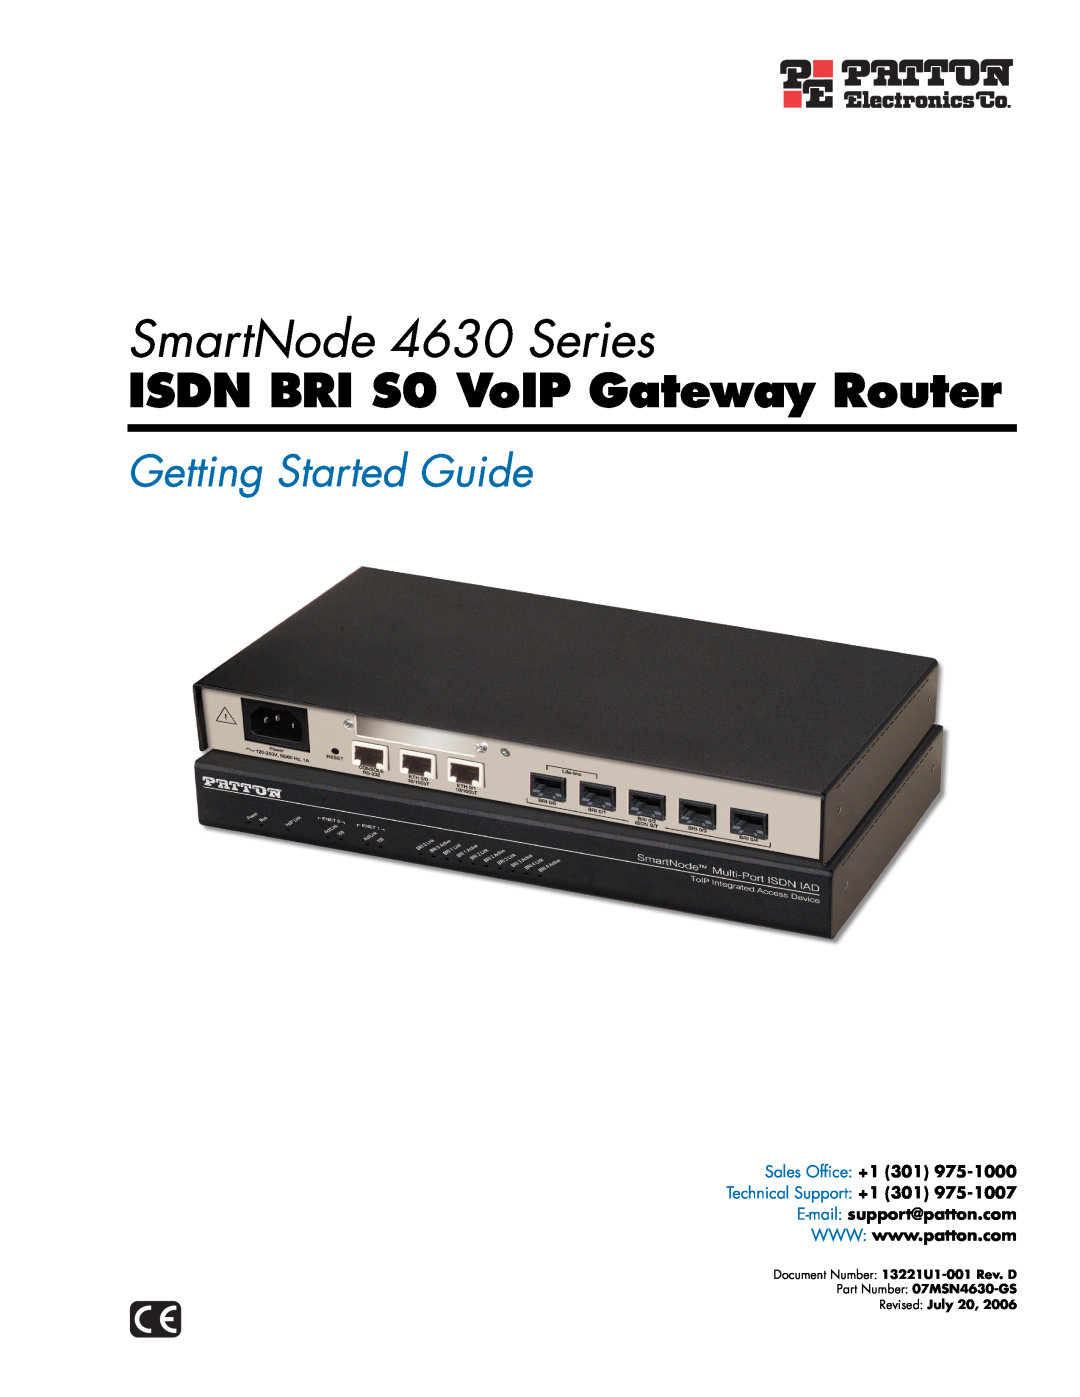 Patton electronic manual SmartNode 4630 Series, ISDN BRI S0 VoIP Gateway Router, Getting Started Guide, Revised July 20 